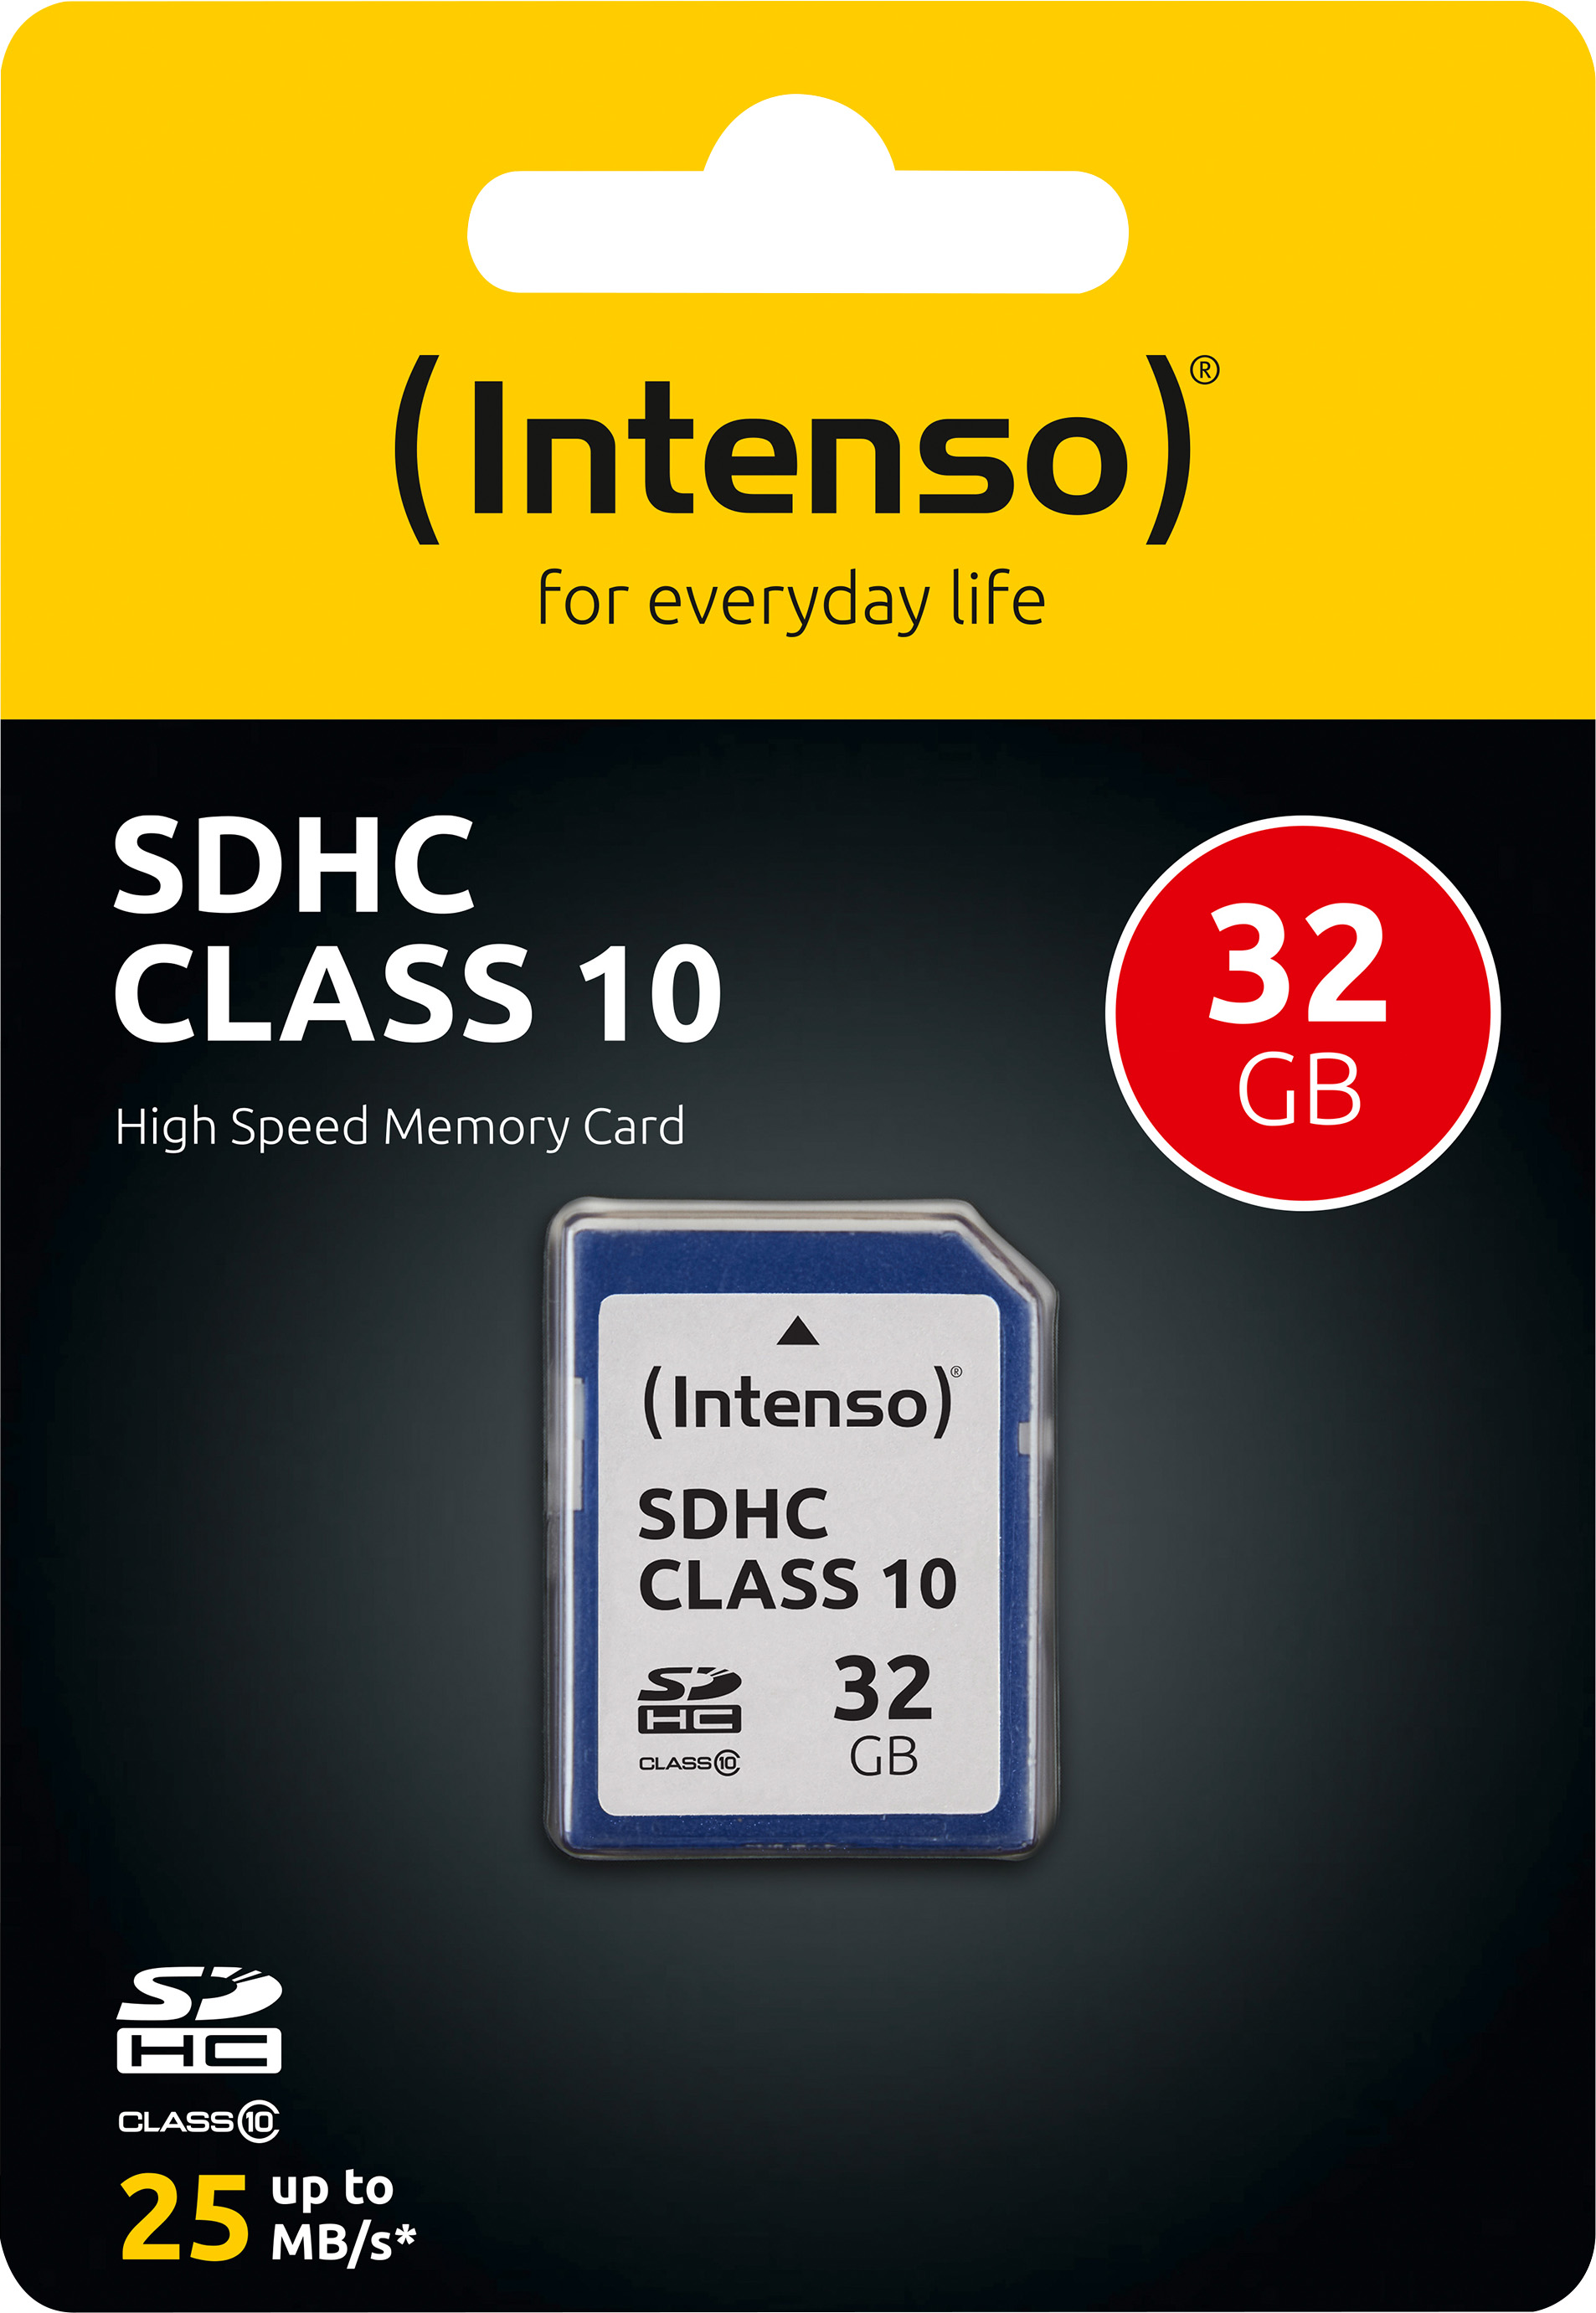 Intenso SDHC-Card 32GB, Class 10 (R) 25MB/s, (W) 10MB/s, Retail-Blister